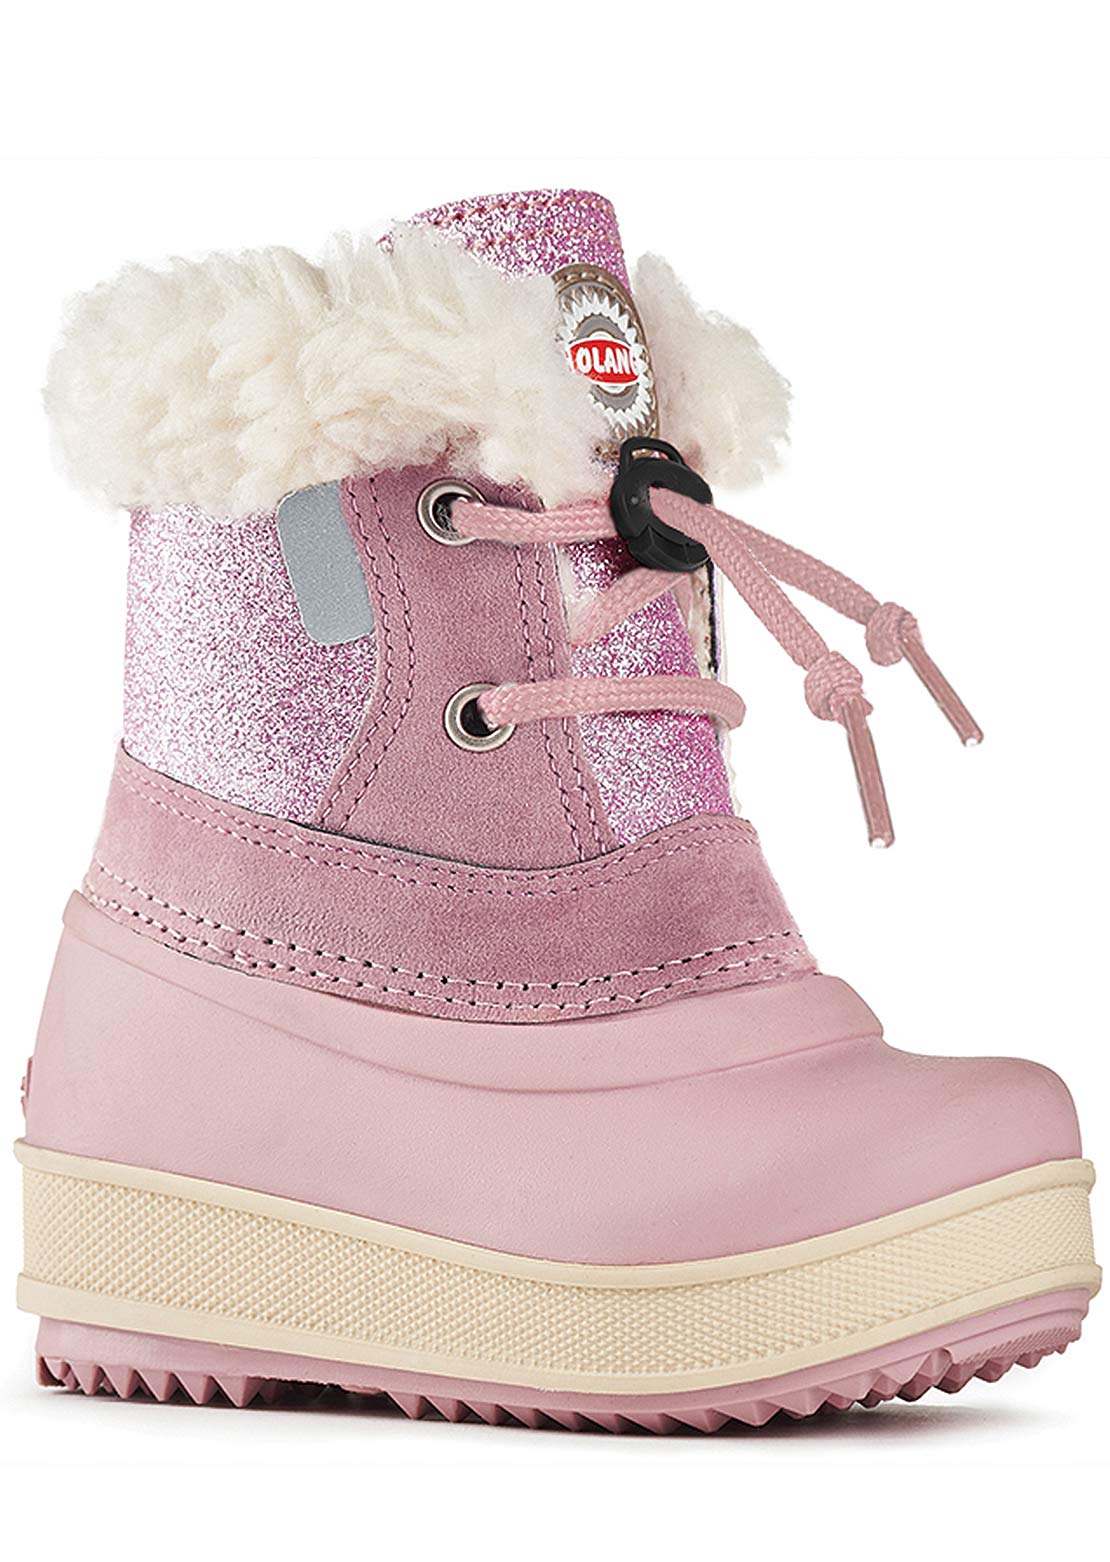 Olang Toddler Ape Boots Lux Rosa